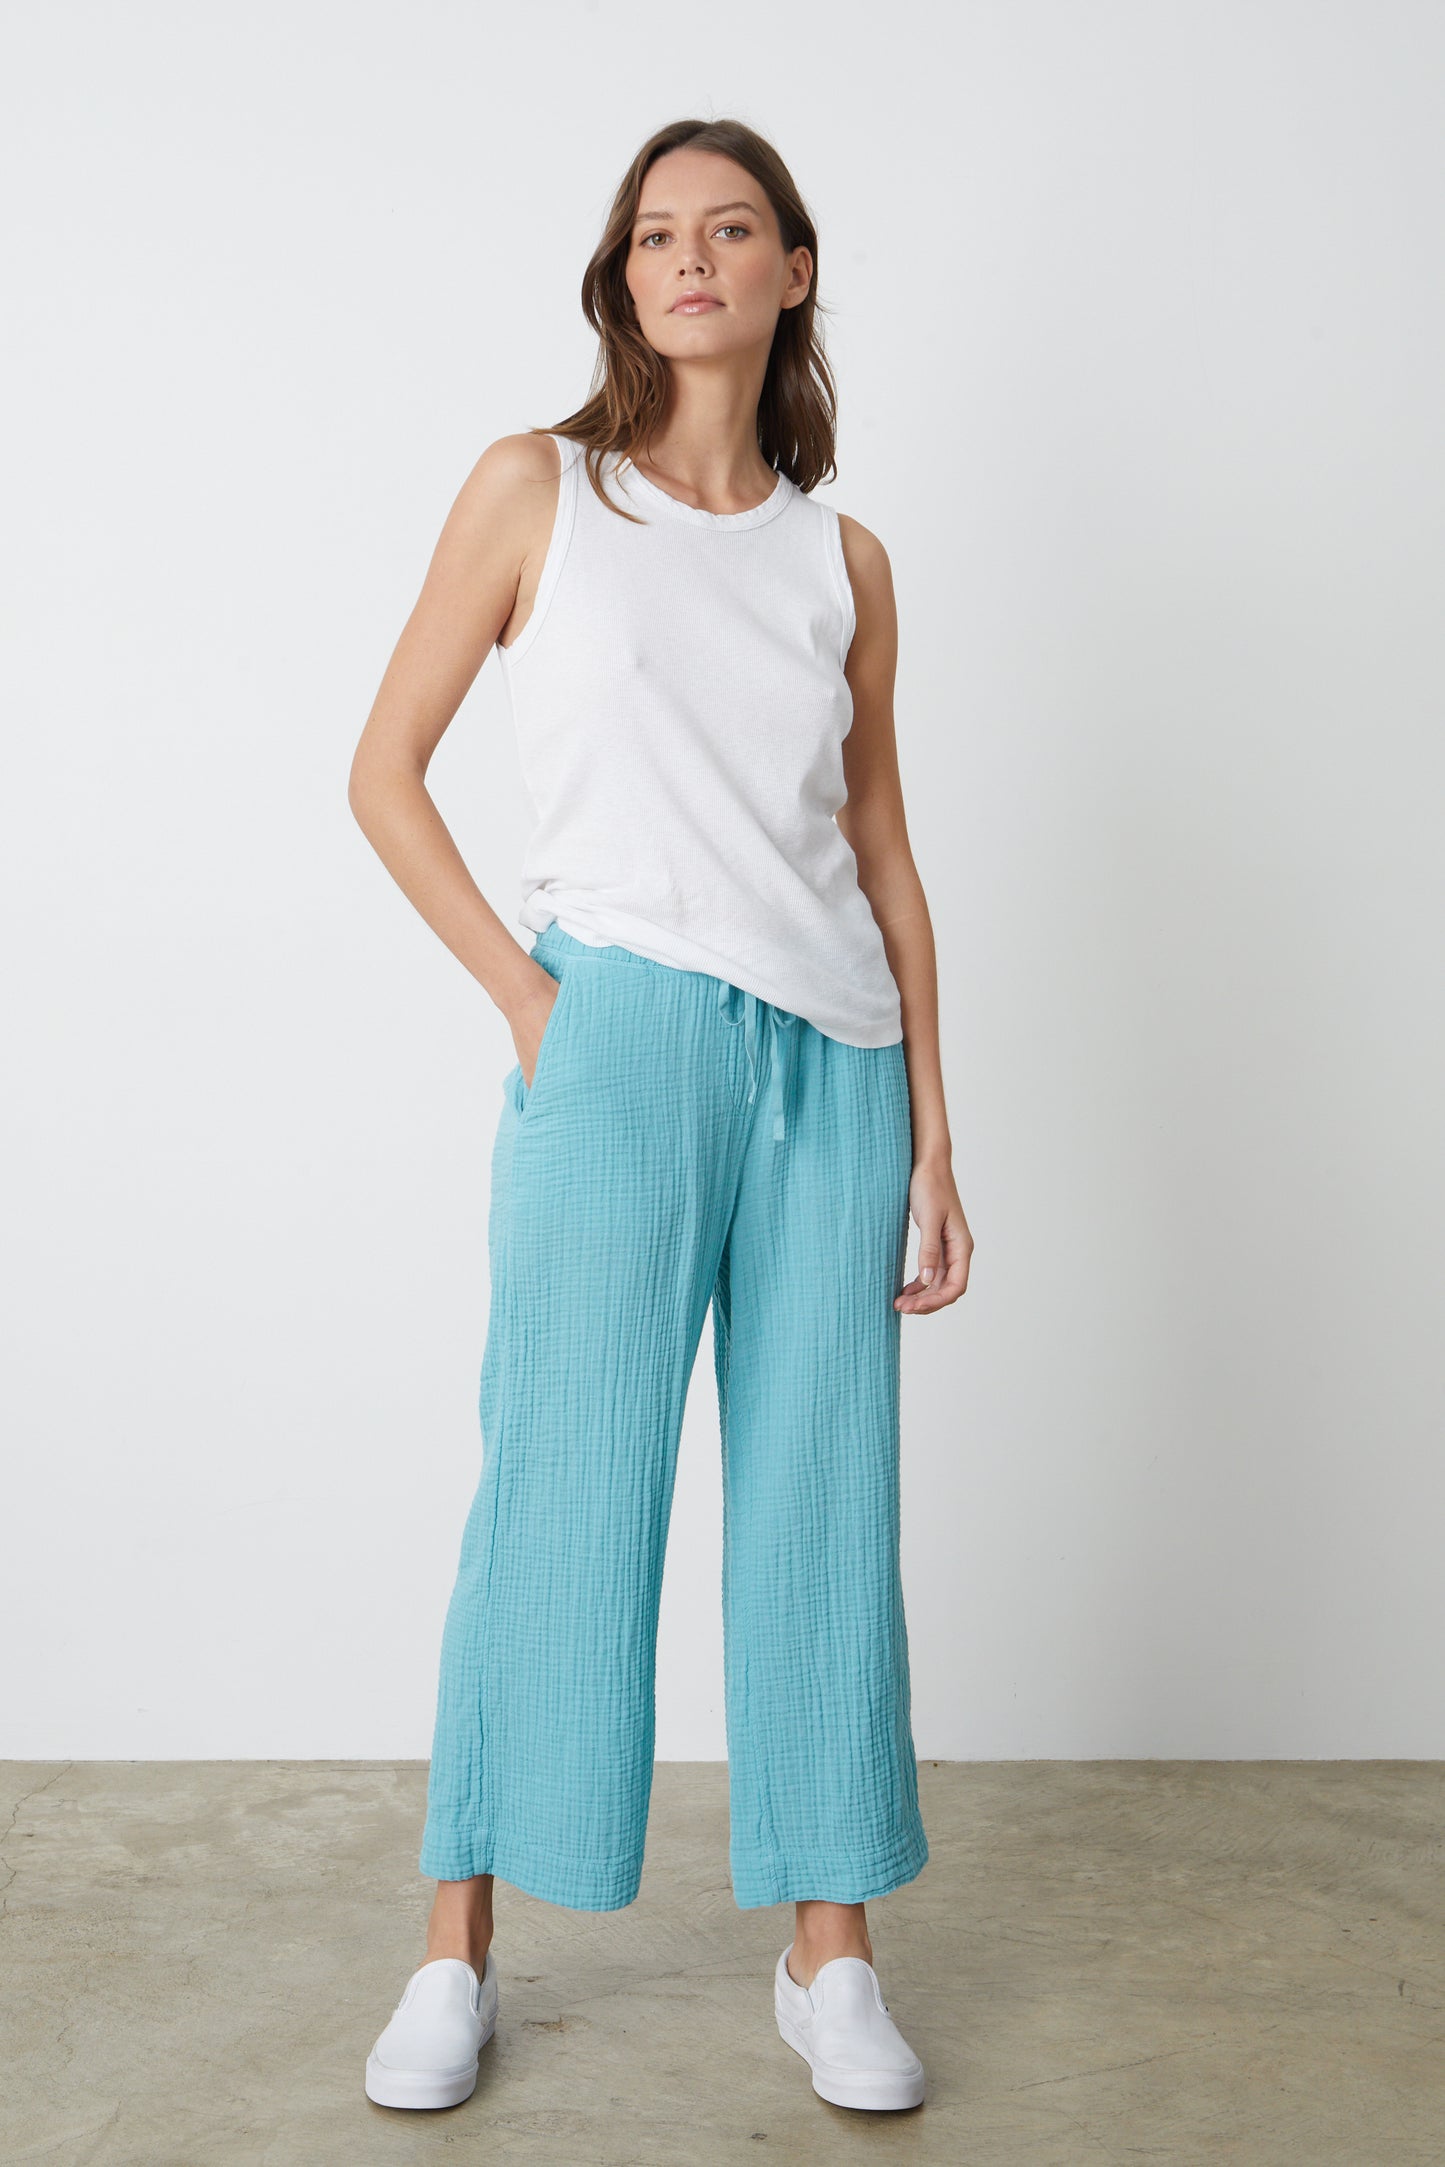 A model wearing a white tank top and Velvet by Graham & Spencer's FRANNY COTTON GAUZE PANT.-26577359601857